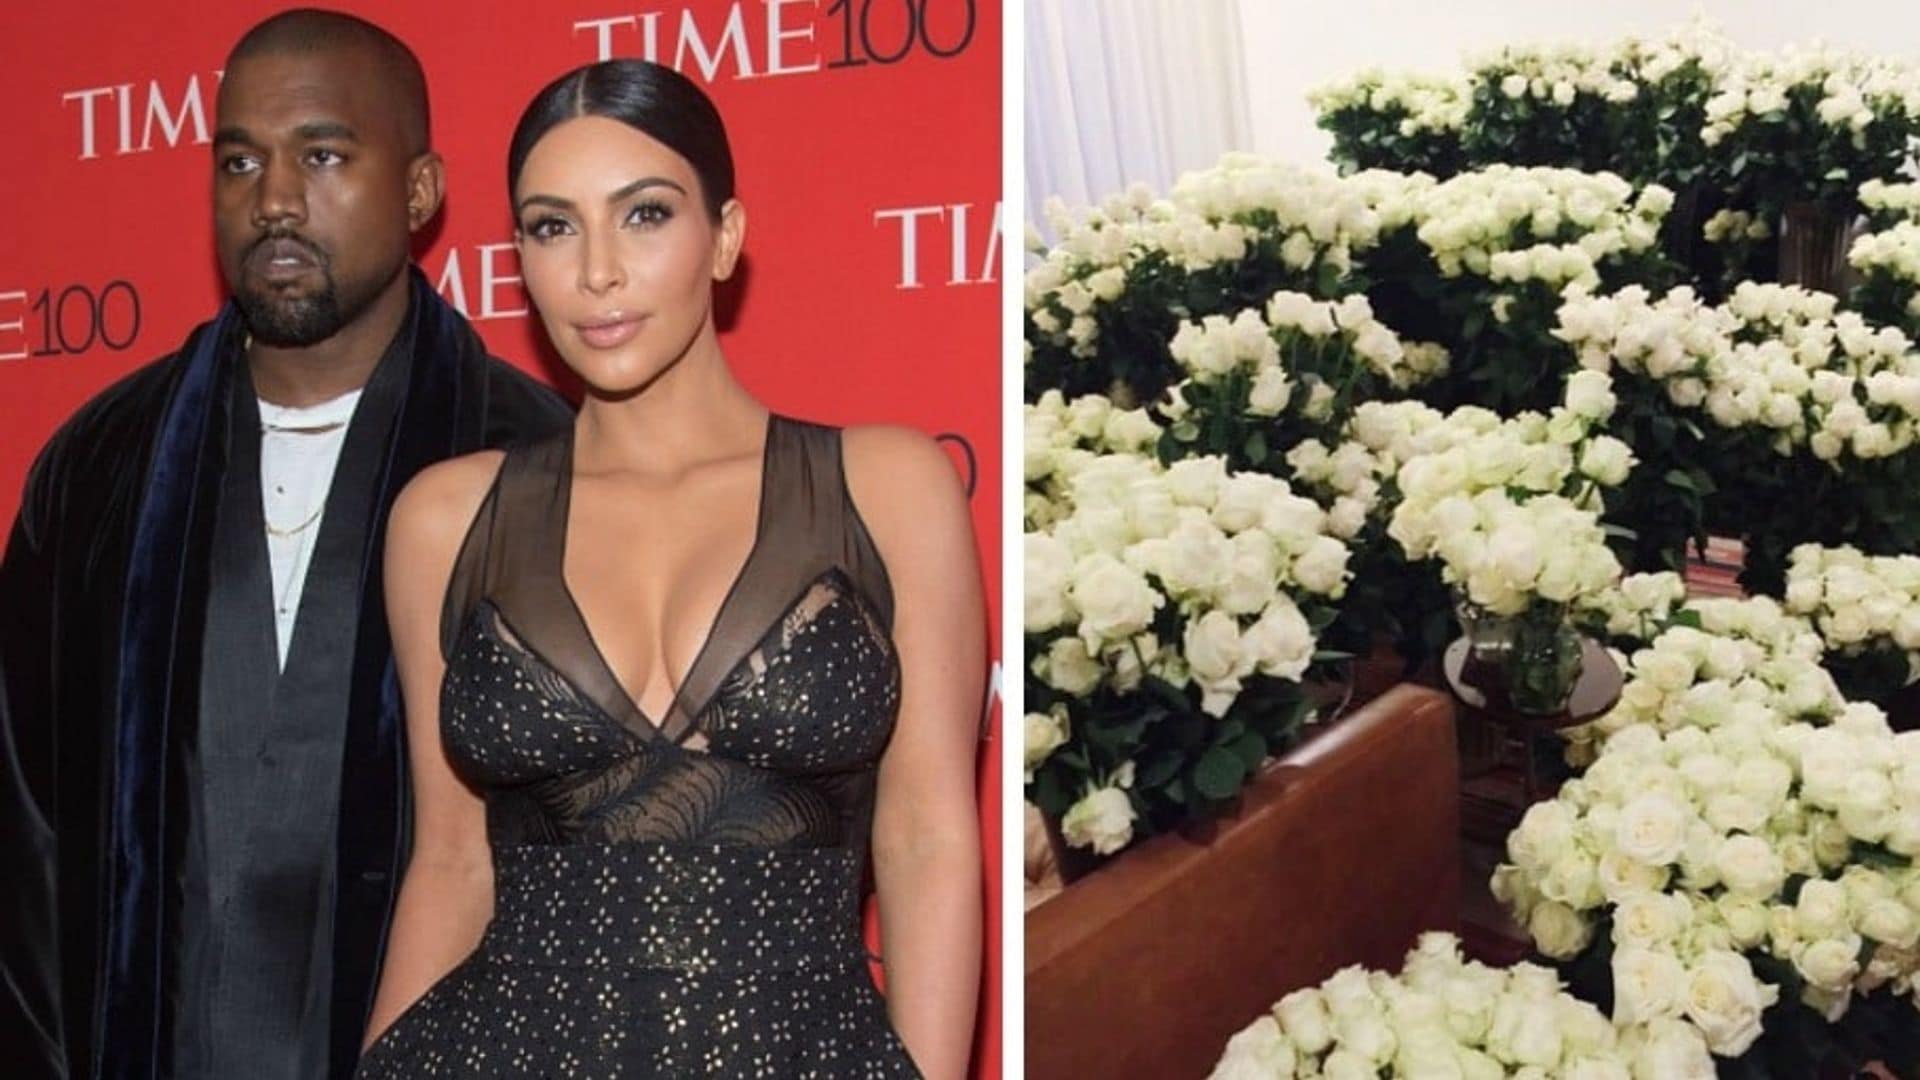 Kanye West's over-the-top Mother's Day surprise for Kim Kardashian